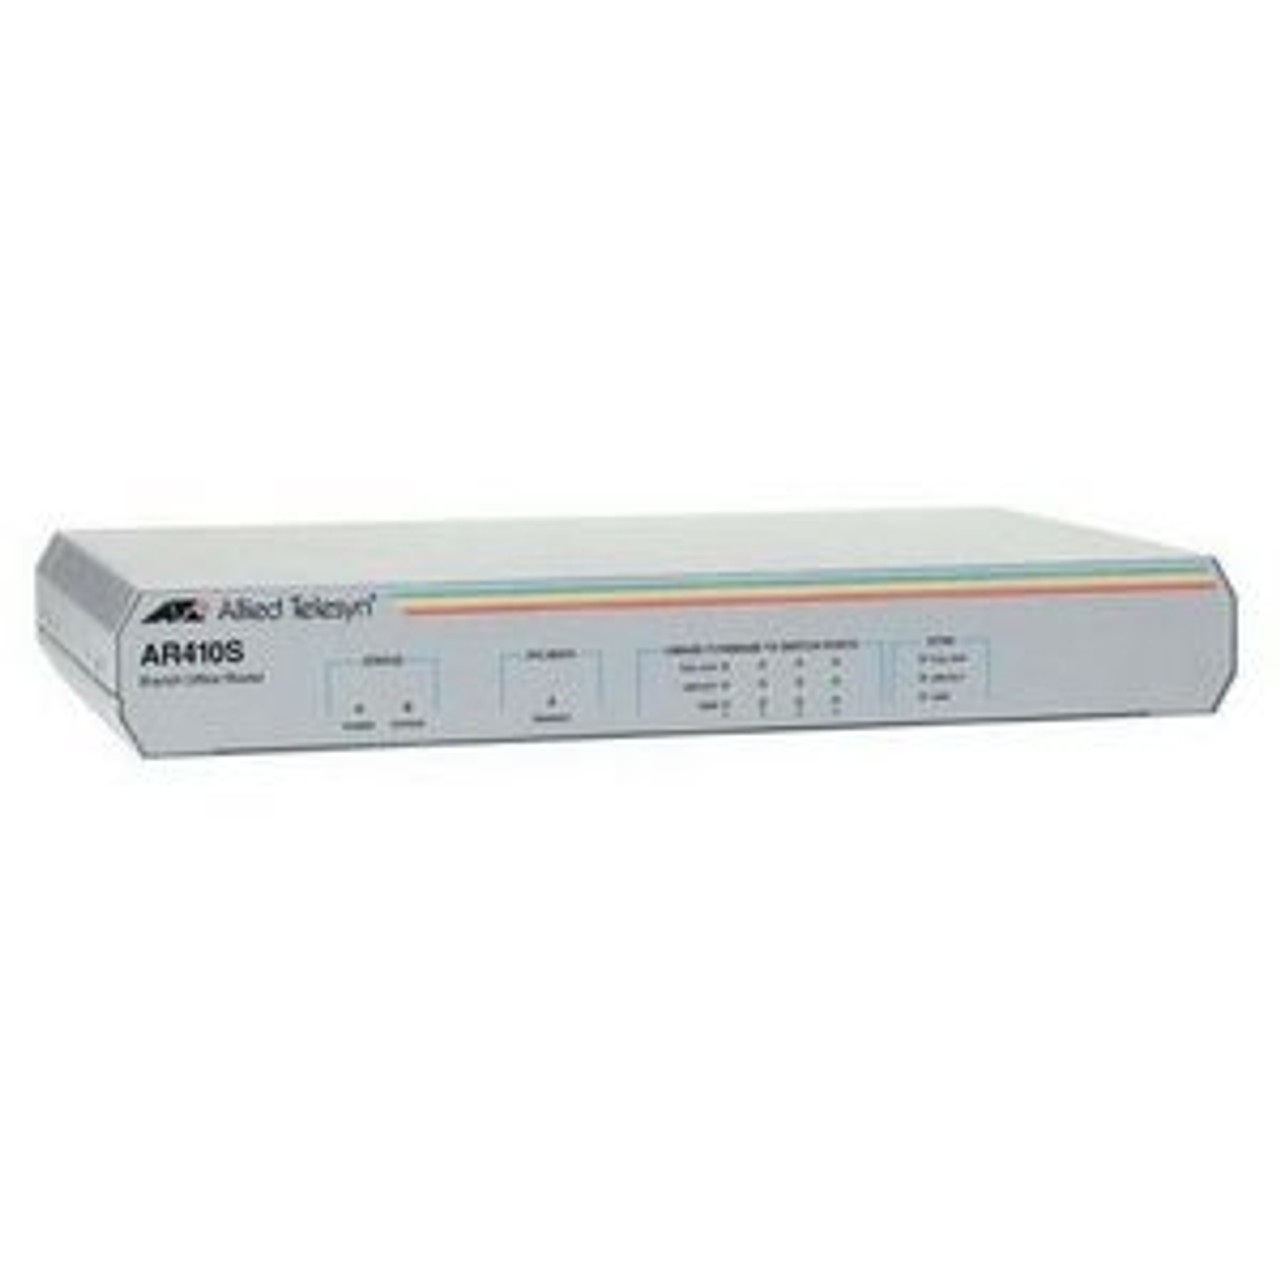 AT-AR410S-10 Allied Telesis Secure Modular Branch Office Router (Refurbished)